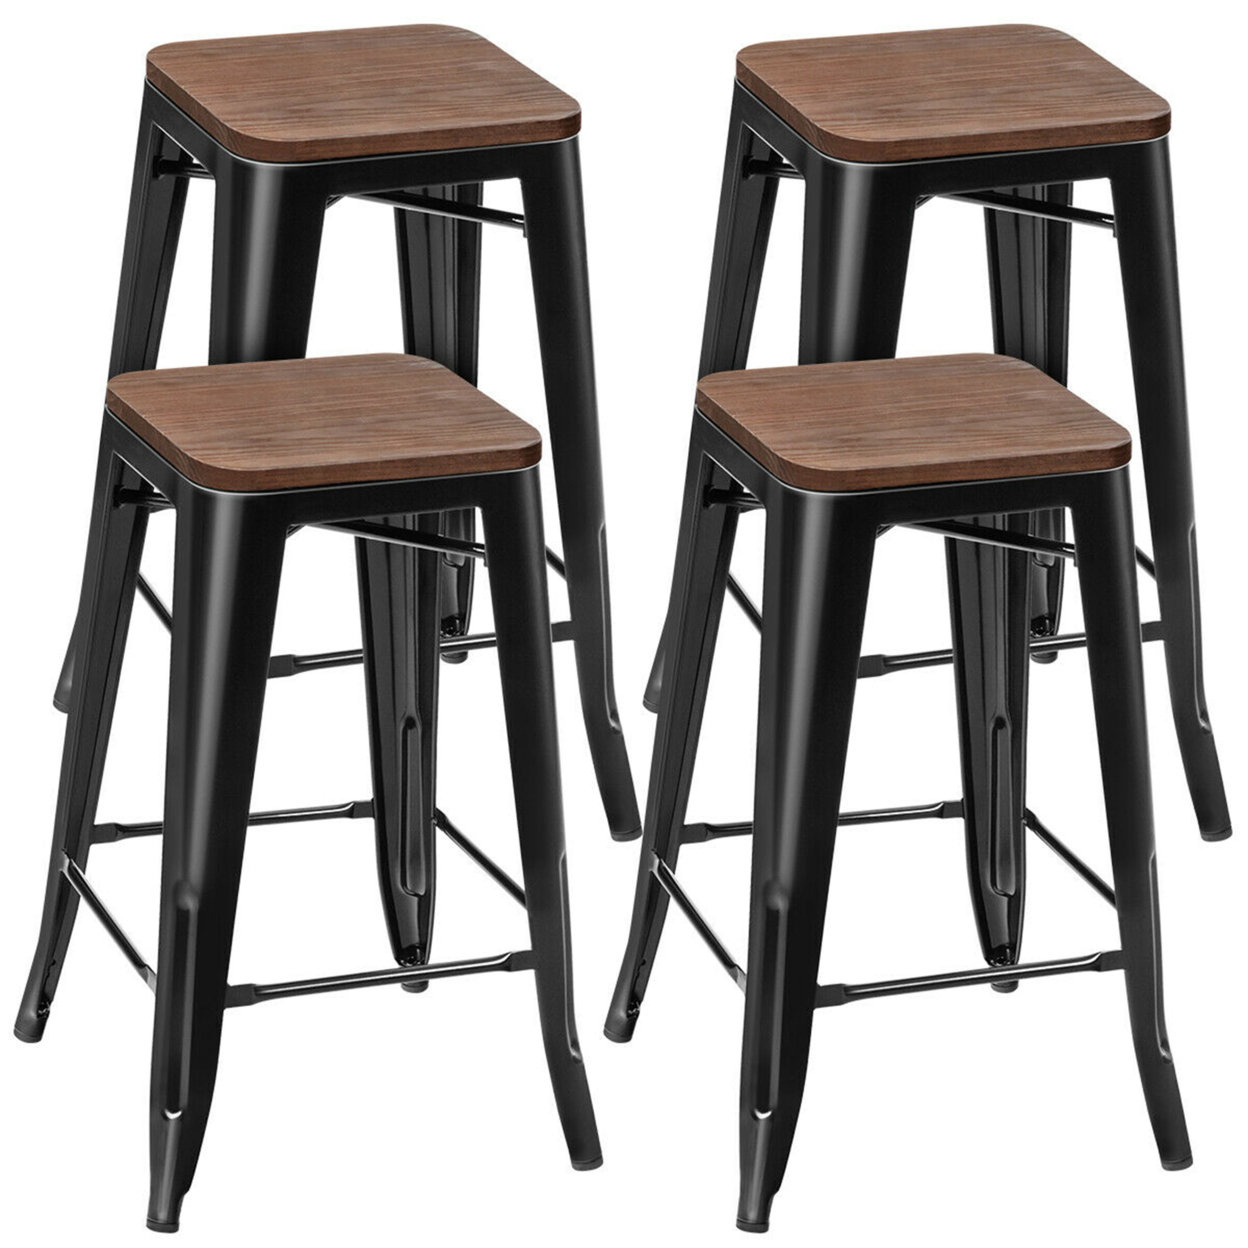 Set Of 4 Counter Height Backless Barstool 26'' Metal Stackable Stool W/Wood Seat